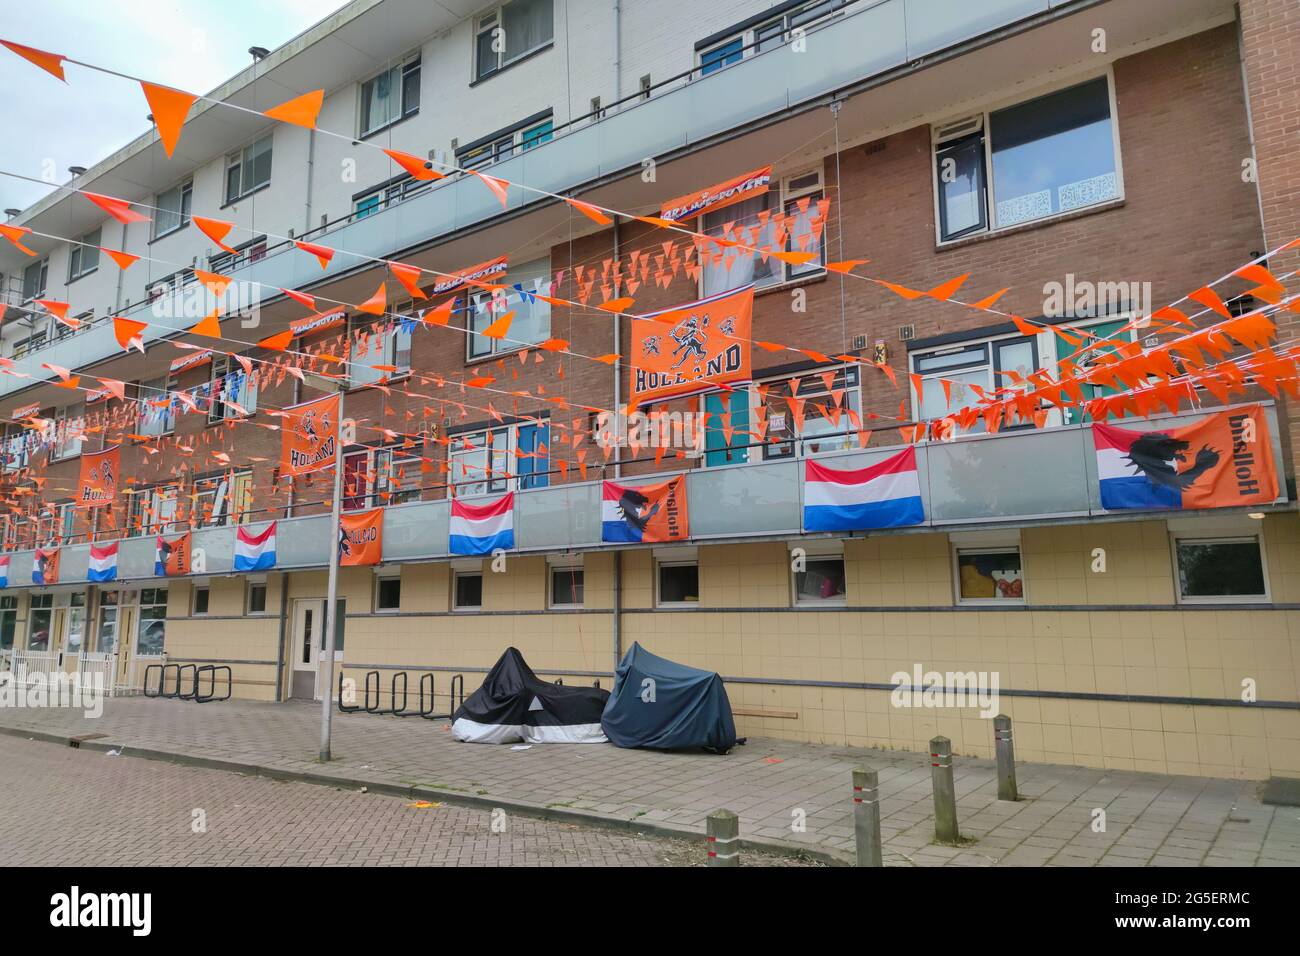 Dutch buildings in a street are decorated with flags to support the Dutch national soccer team. Stock Photo